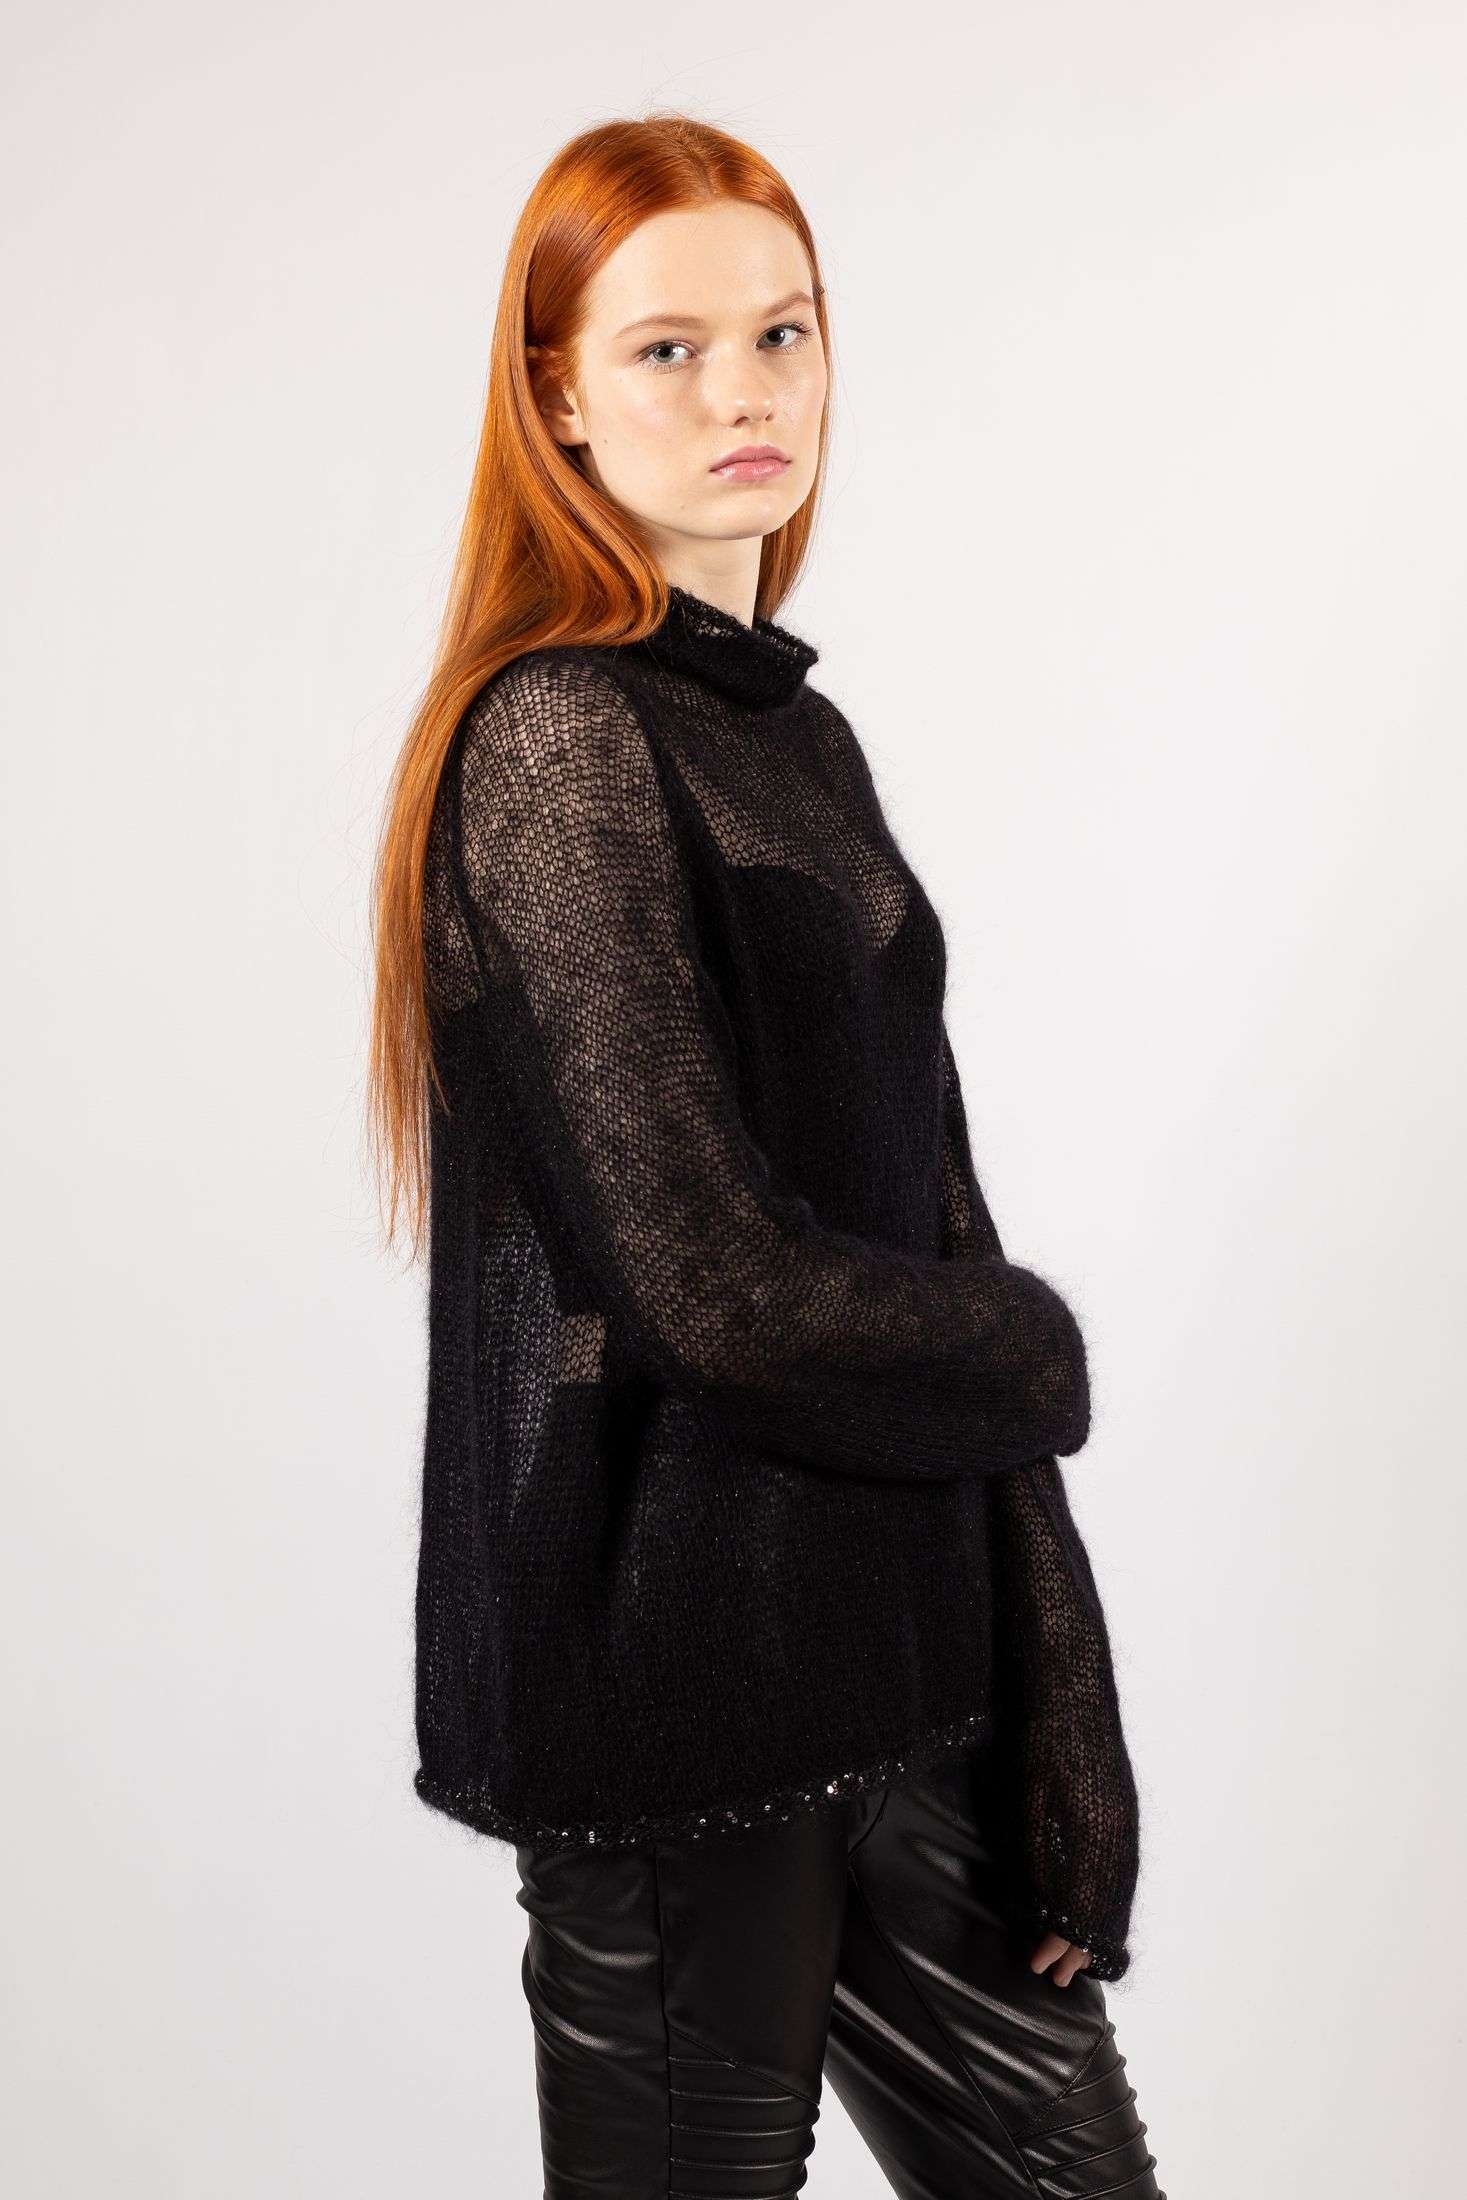 Make a statement with our women's black mohair sweater, a must-have fashion piece with long sleeves and a hint of transparency for that effortlessly chic look.